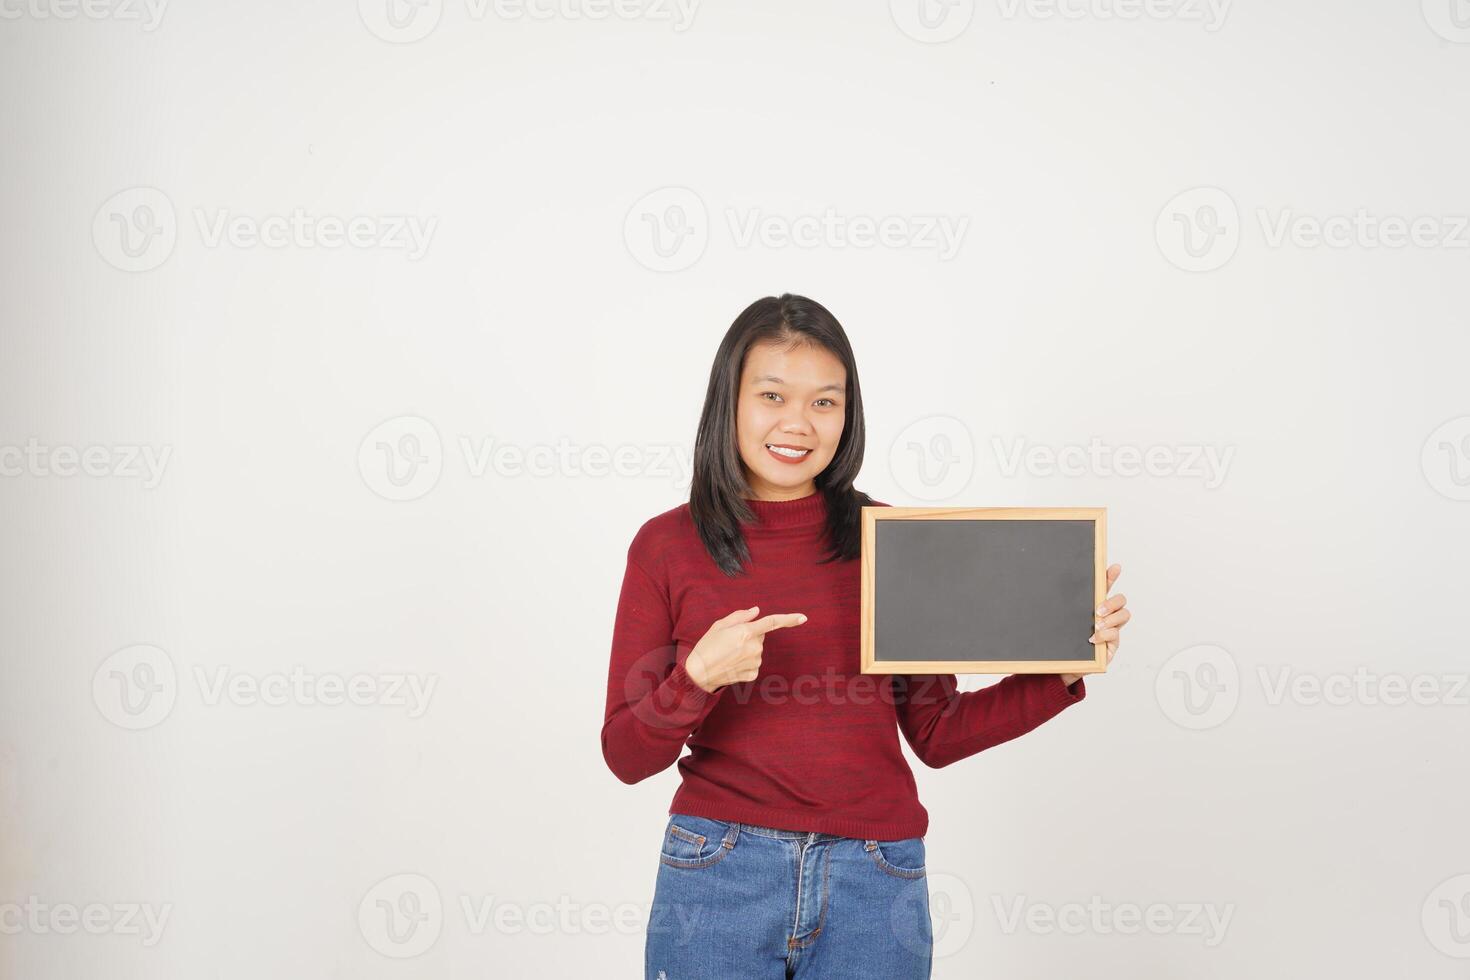 Young Asian woman in Red t-shirt Showing and holding black or chalk board sign isolated on white background photo